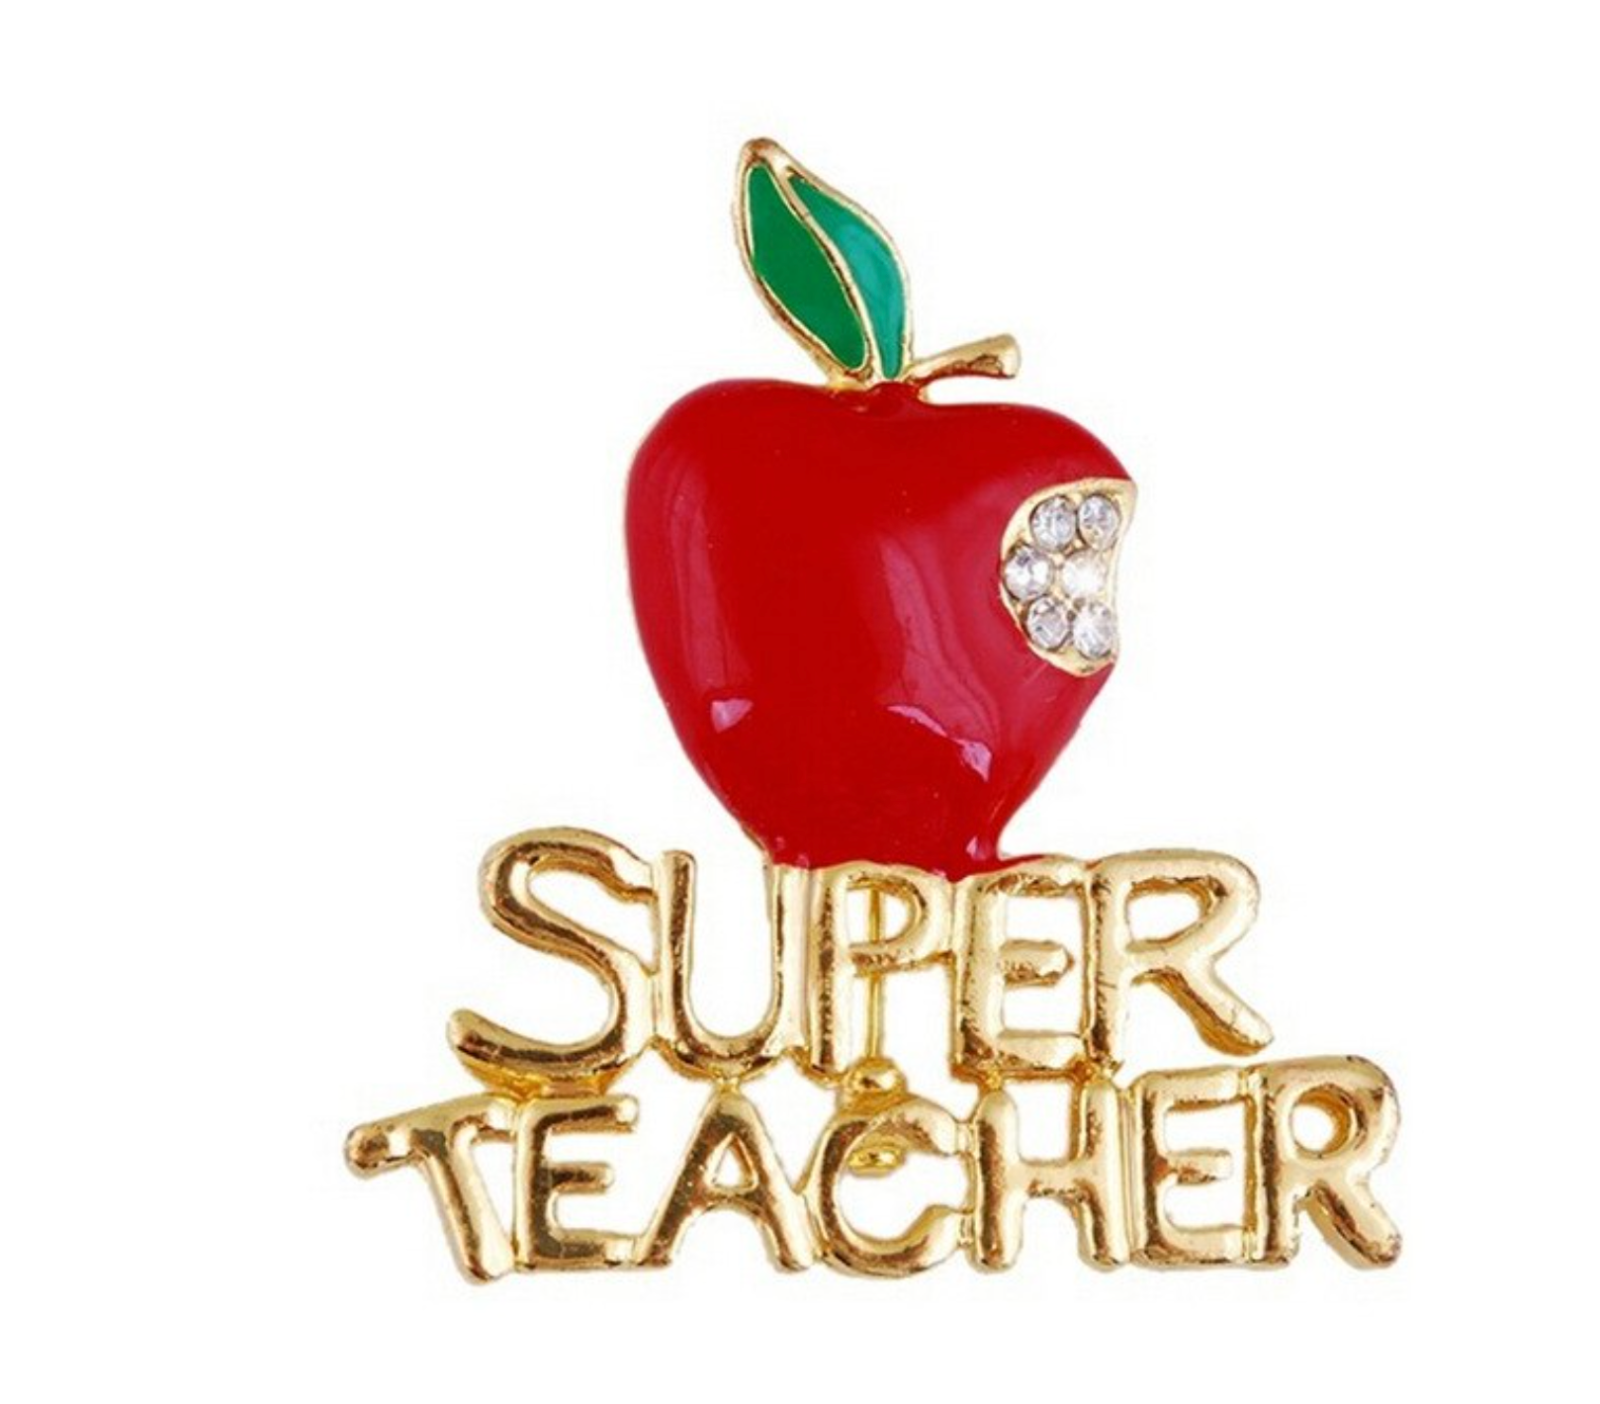 Super Teacher Red Apple Designer Brooch Vintage Look Gold Plated Broach Pin XY7 - $19.12